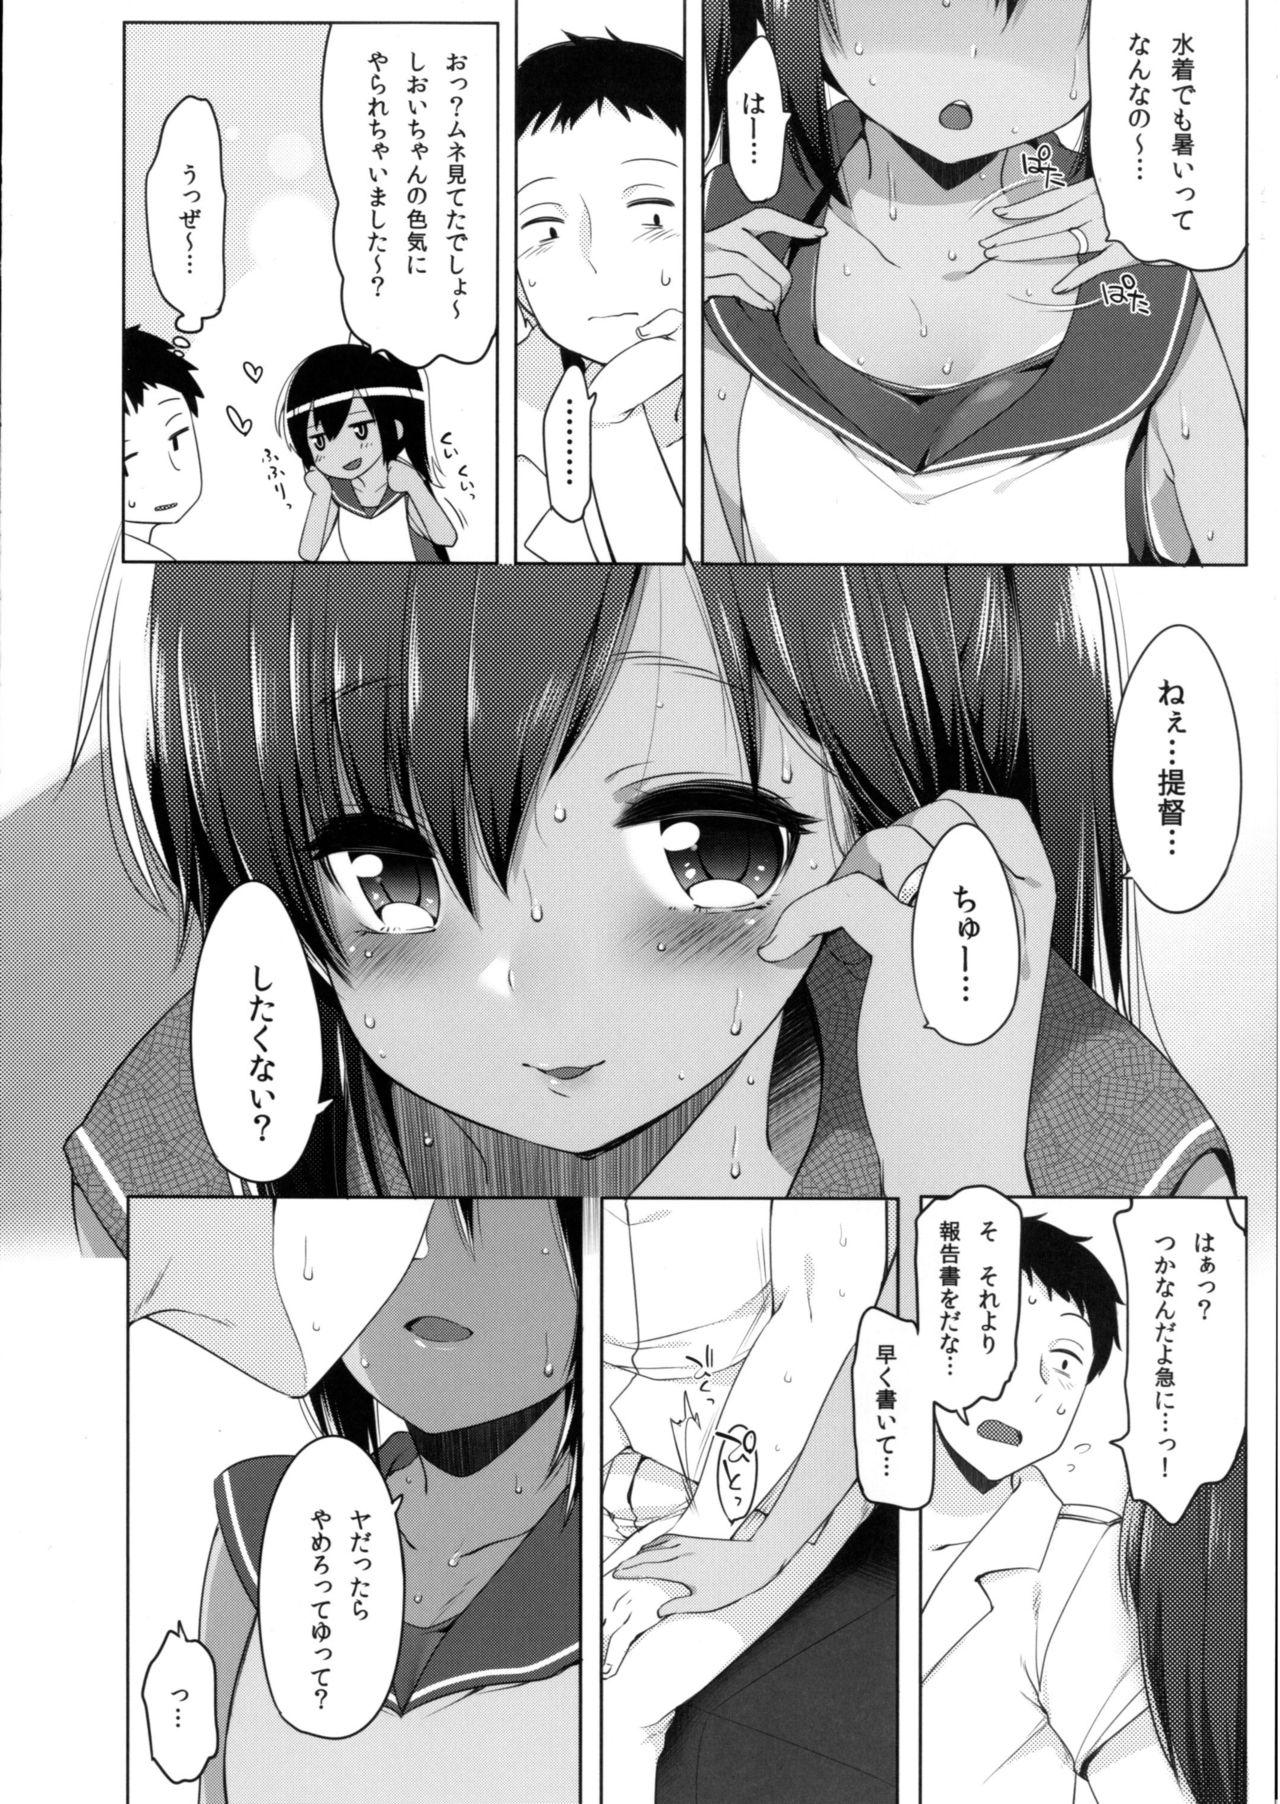 Amature Porn 401 - Kantai collection Spying - Page 5